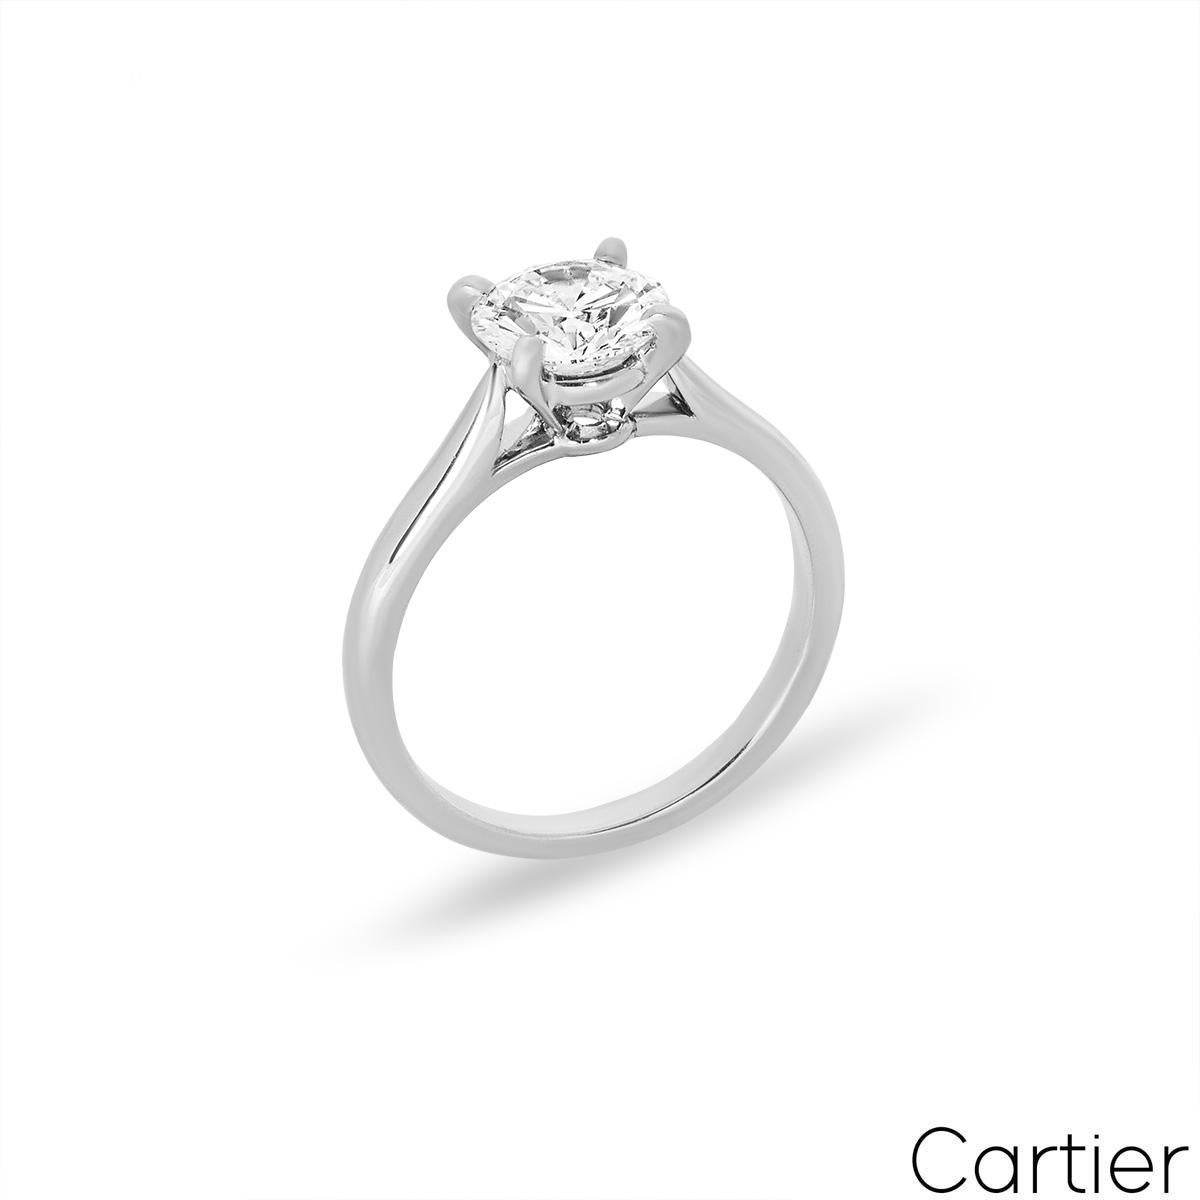 A stunning platinum Cartier diamond engagement ring from the 1895 solitaire collection. The ring comprises of a round brilliant cut diamond in a four claw setting with a weight of 1.54ct, G colour and VS2 clarity. The 2.4mm ring has a gross weight